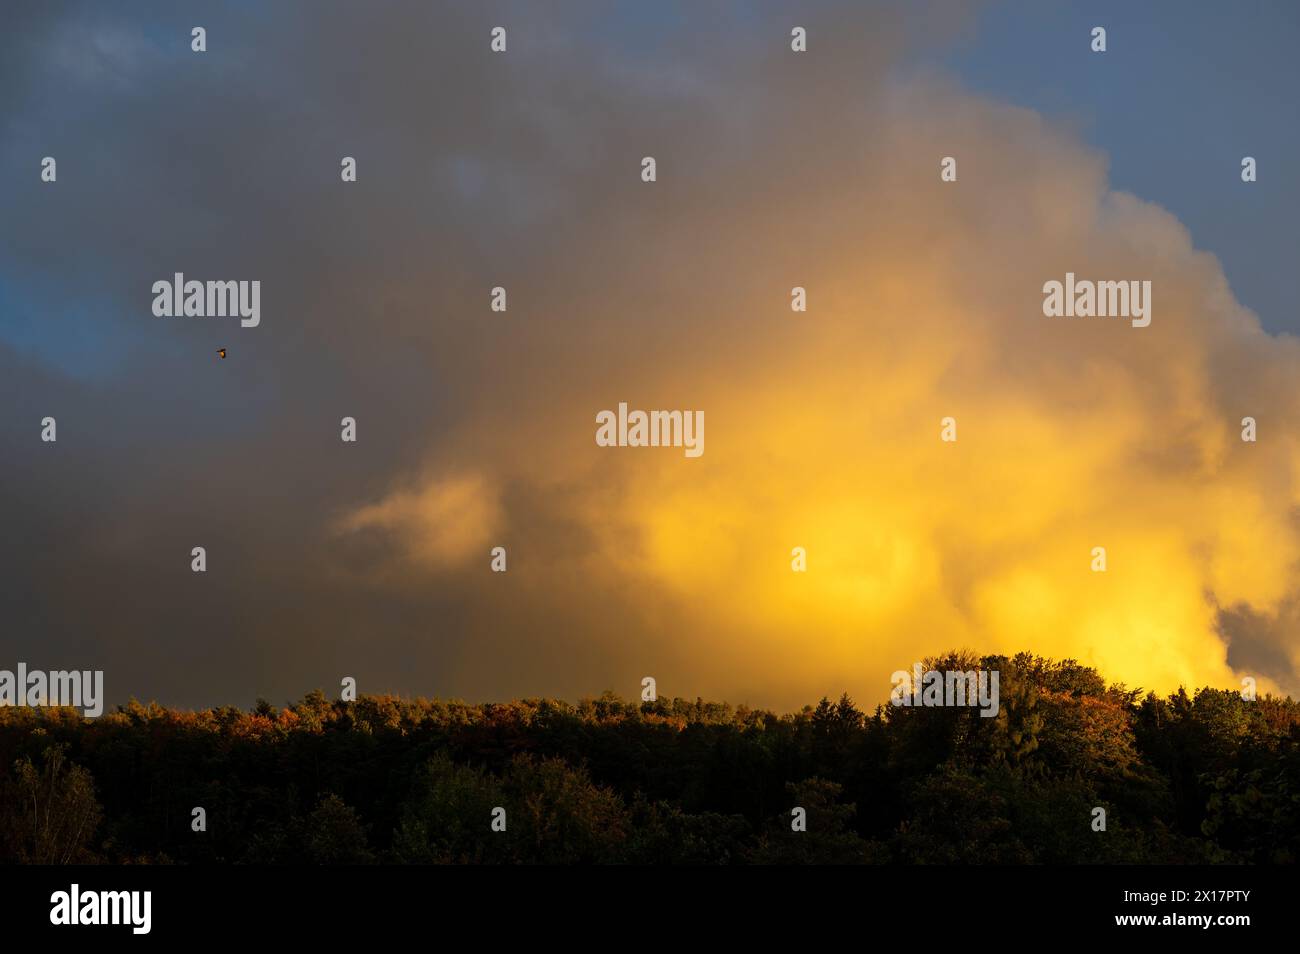 Big yellow cloud in the sky in the evening sun over a green forest Stock Photo